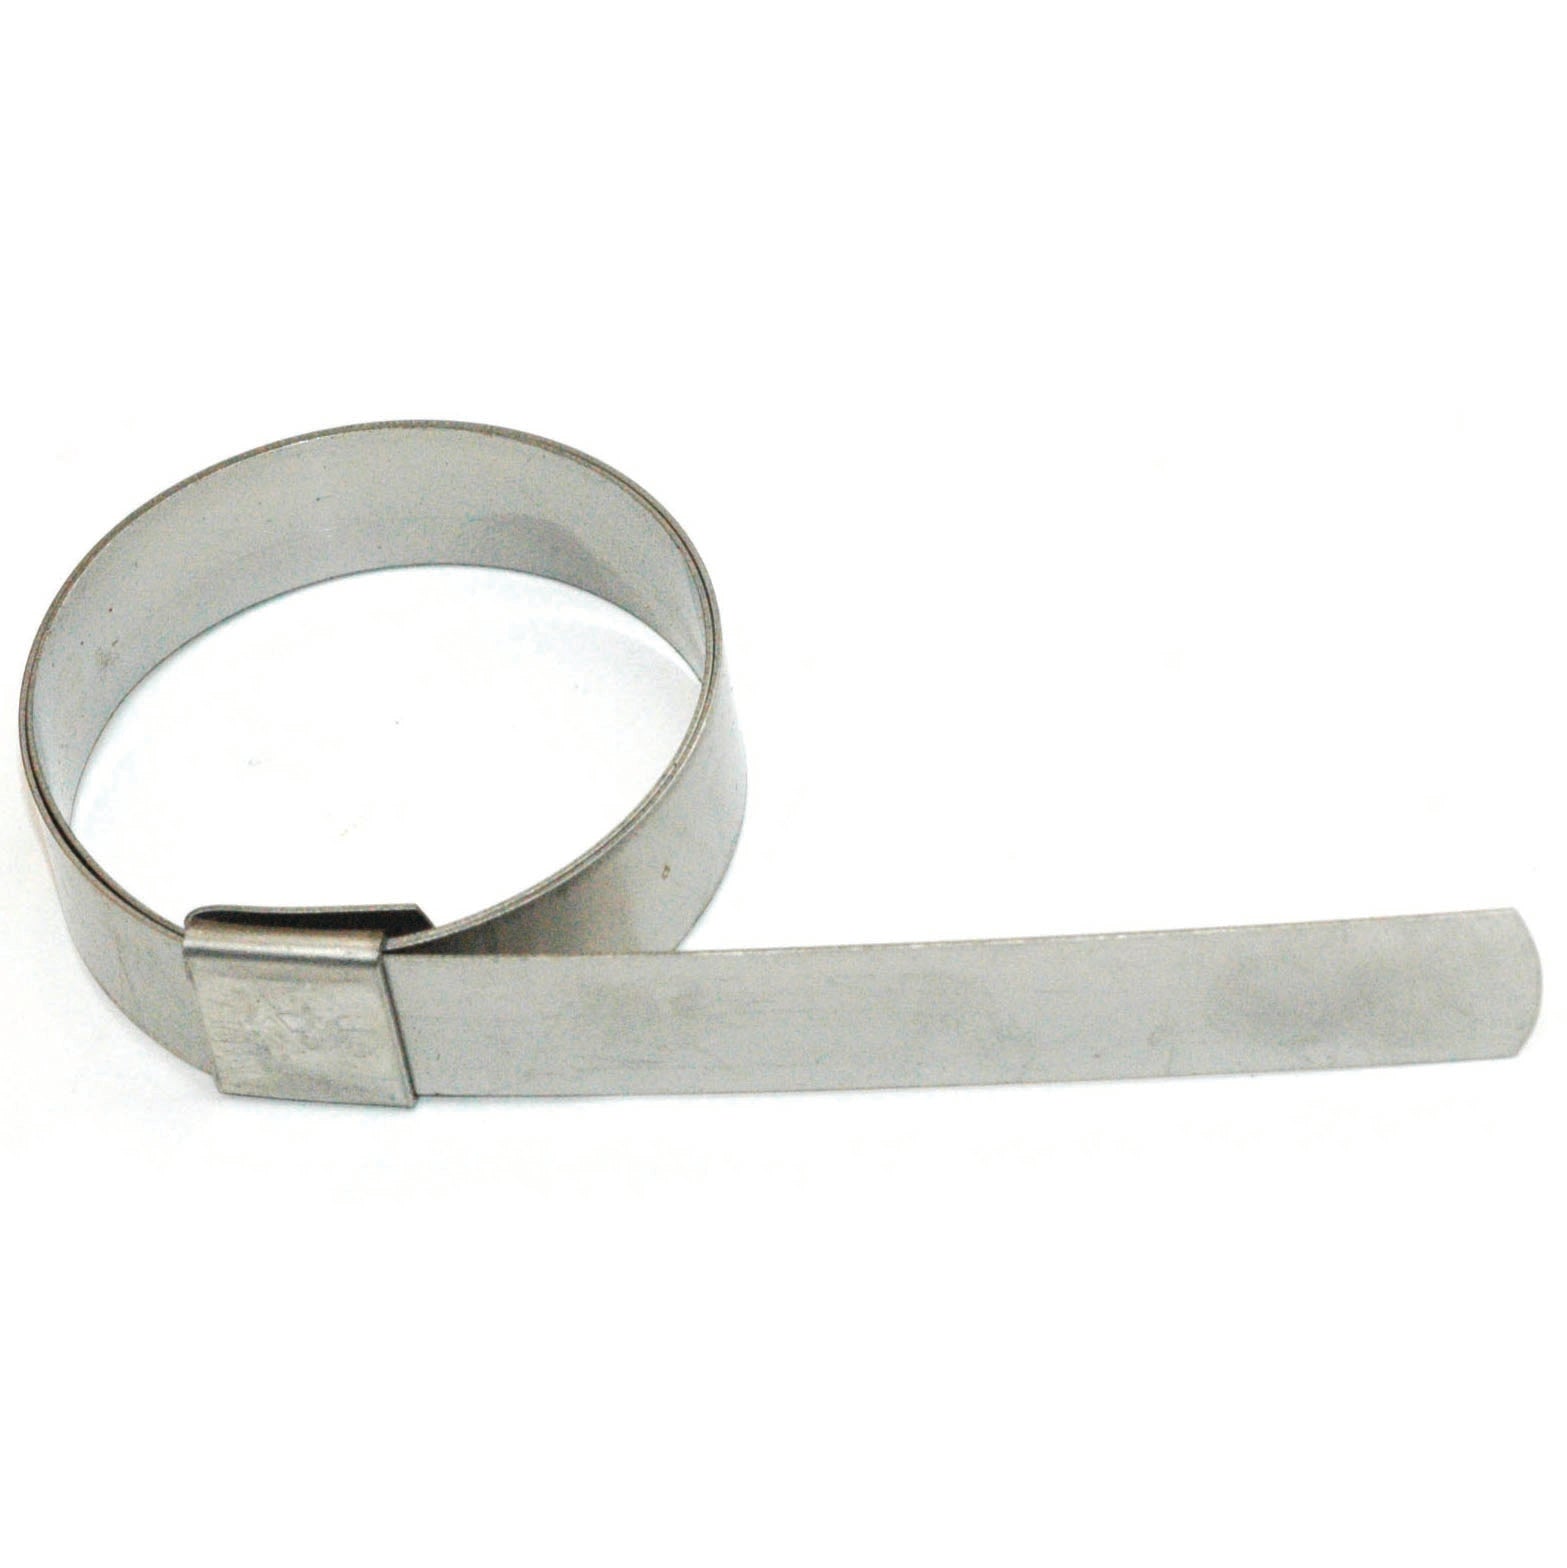 Stainless steel band-it clamp fitting